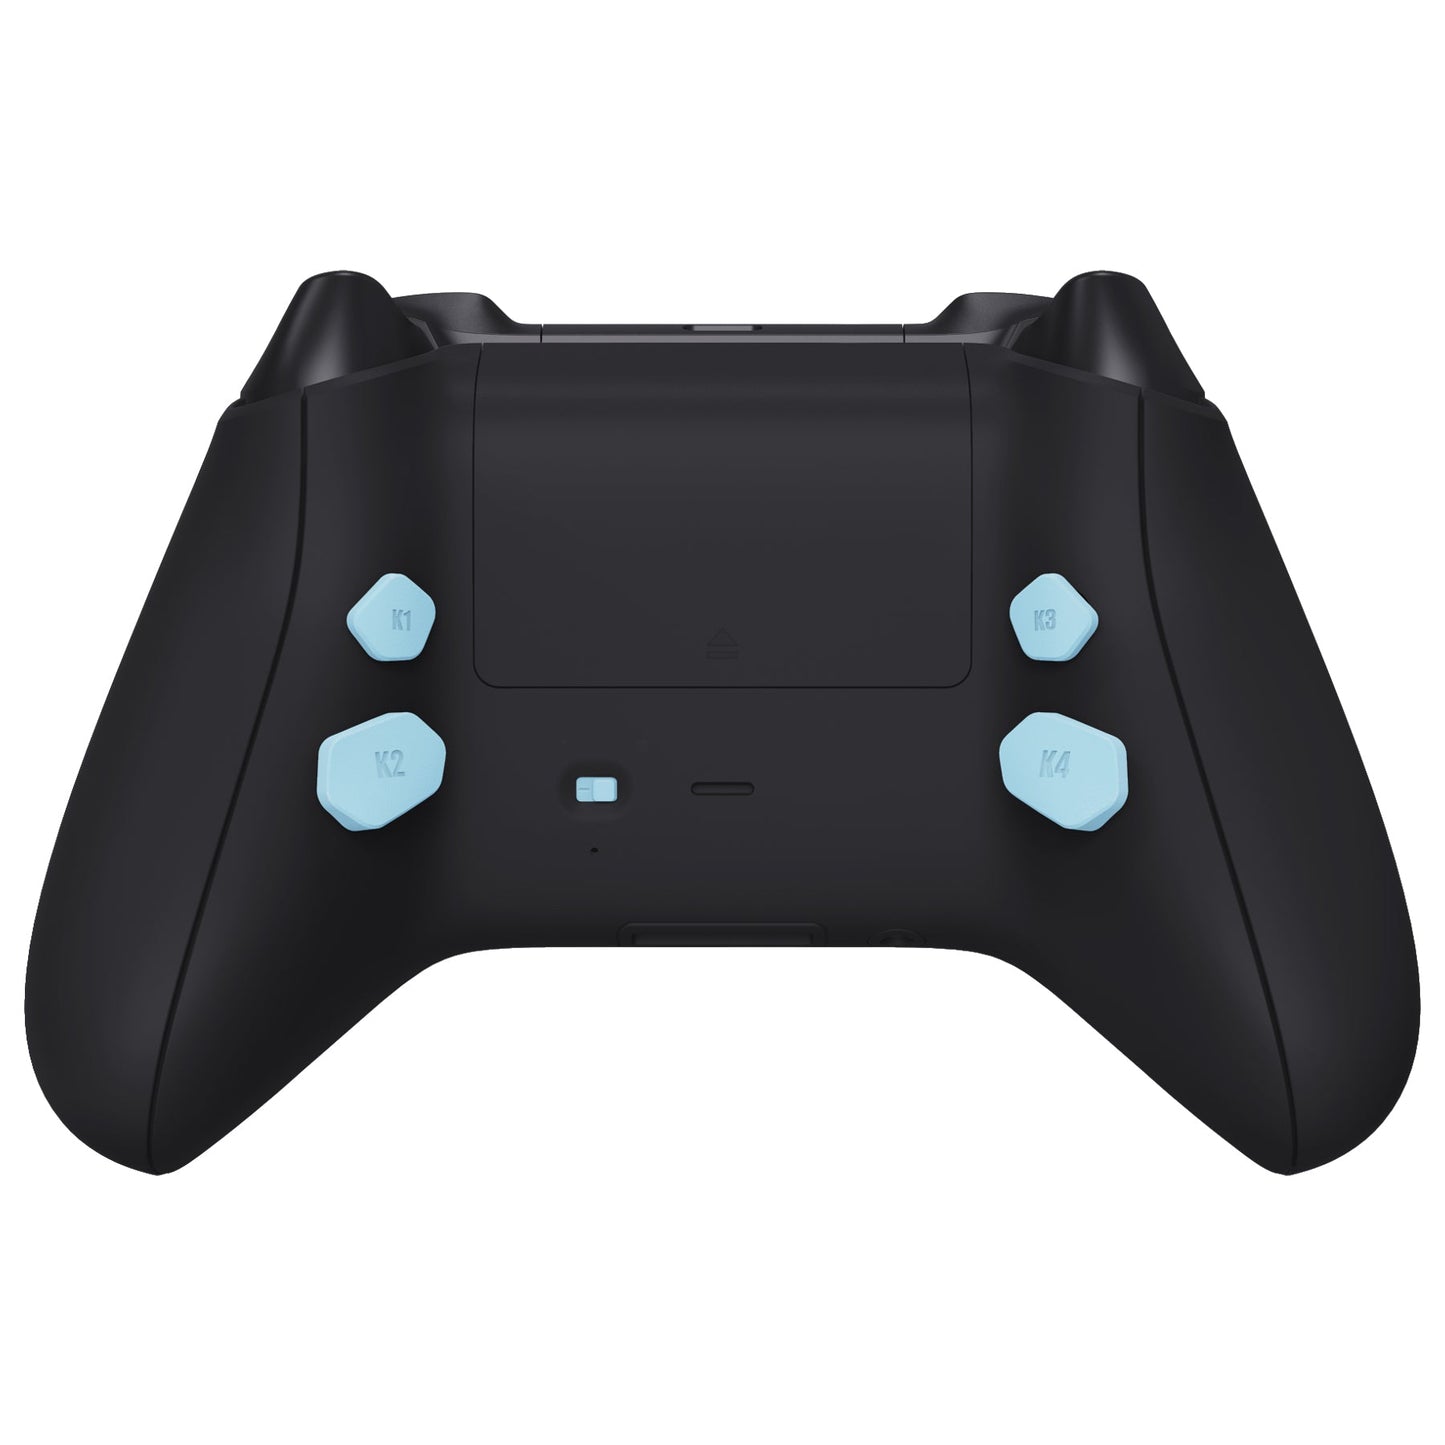 eXtremeRate Retail Heaven Blue Replacement Redesigned K1 K2 K3 K4 Back Buttons Paddles & Toggle Switch for Xbox Series X/S Controller eXtremerate Hope Remap Kit - Controller & Hope Remap Board NOT Included - DX3P3013